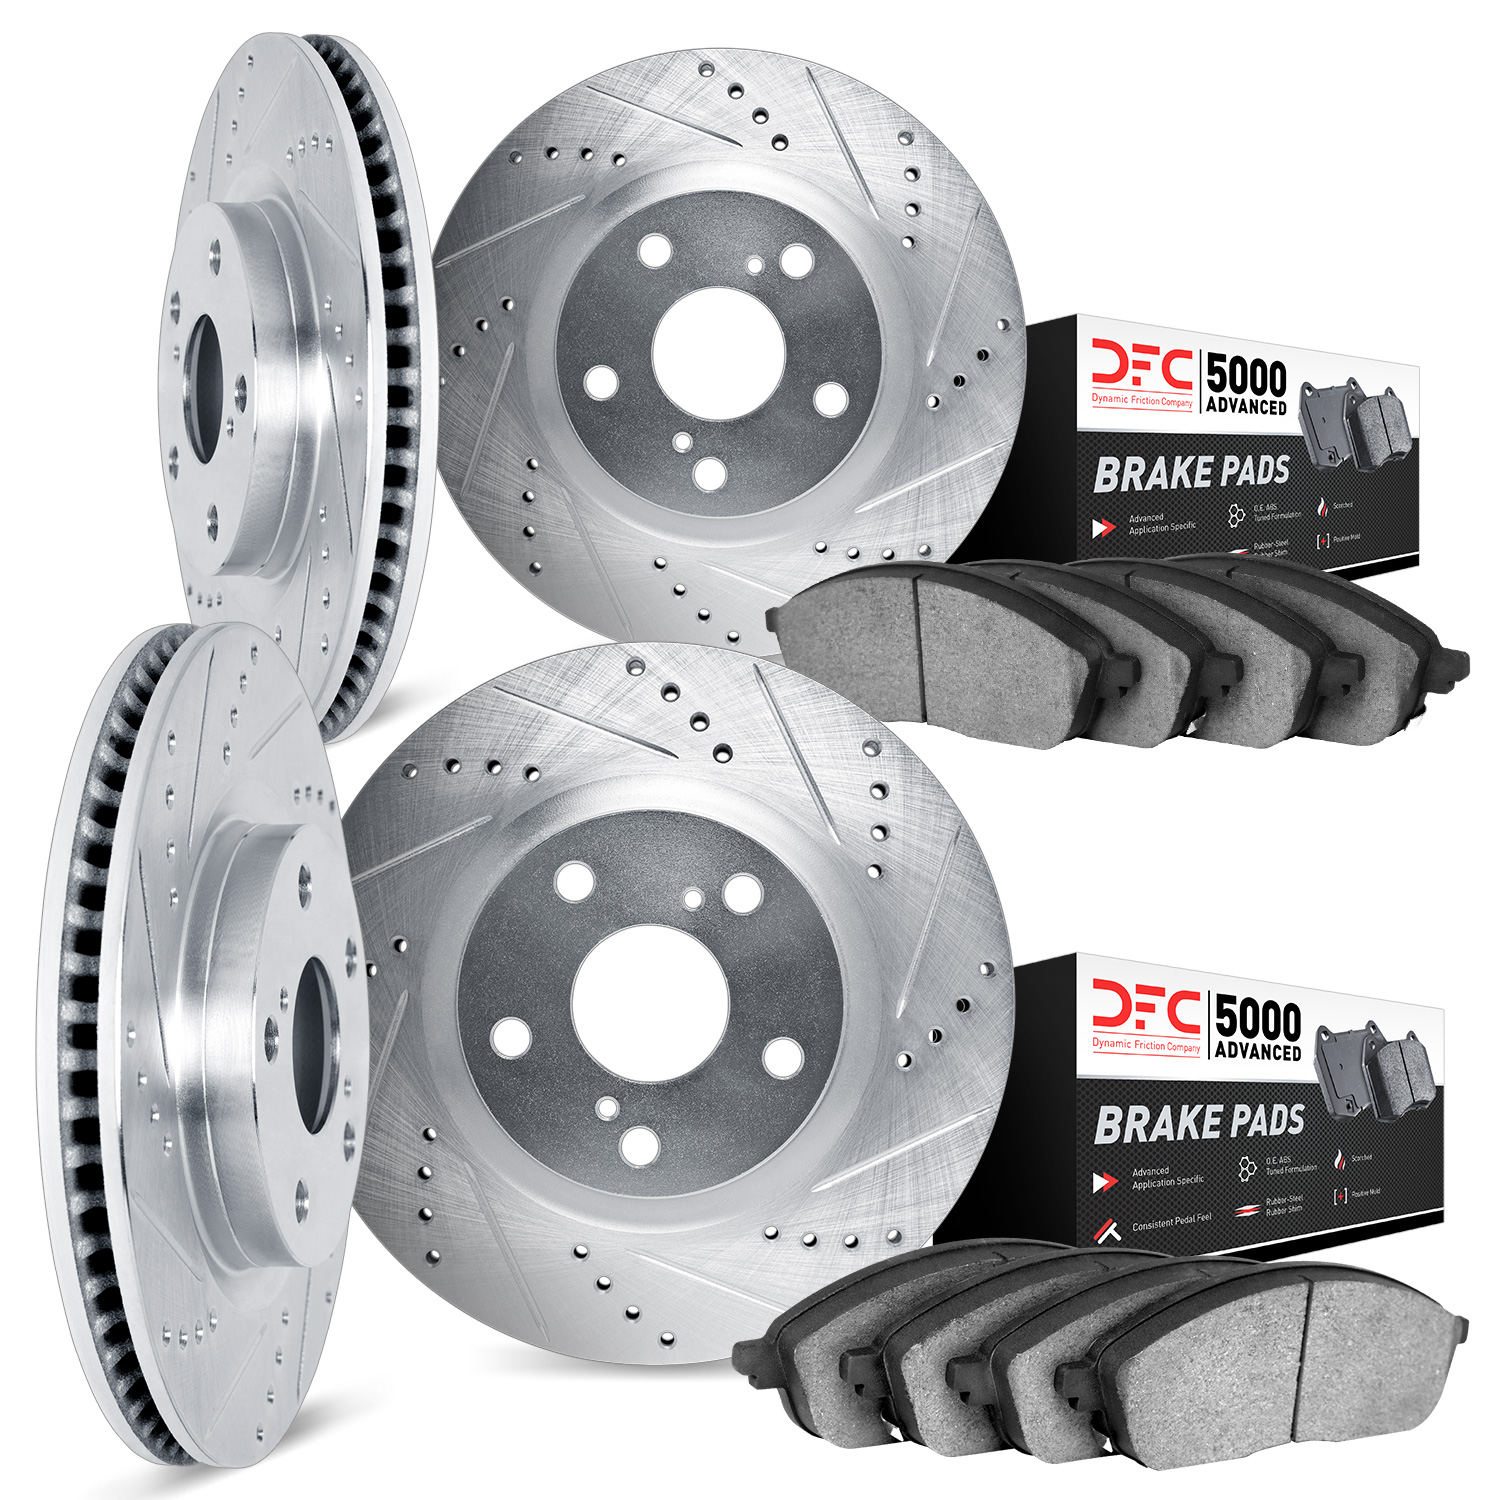 7504-45014 Drilled/Slotted Brake Rotors w/5000 Advanced Brake Pads Kit [Silver], 1990-1990 GM, Position: Front and Rear